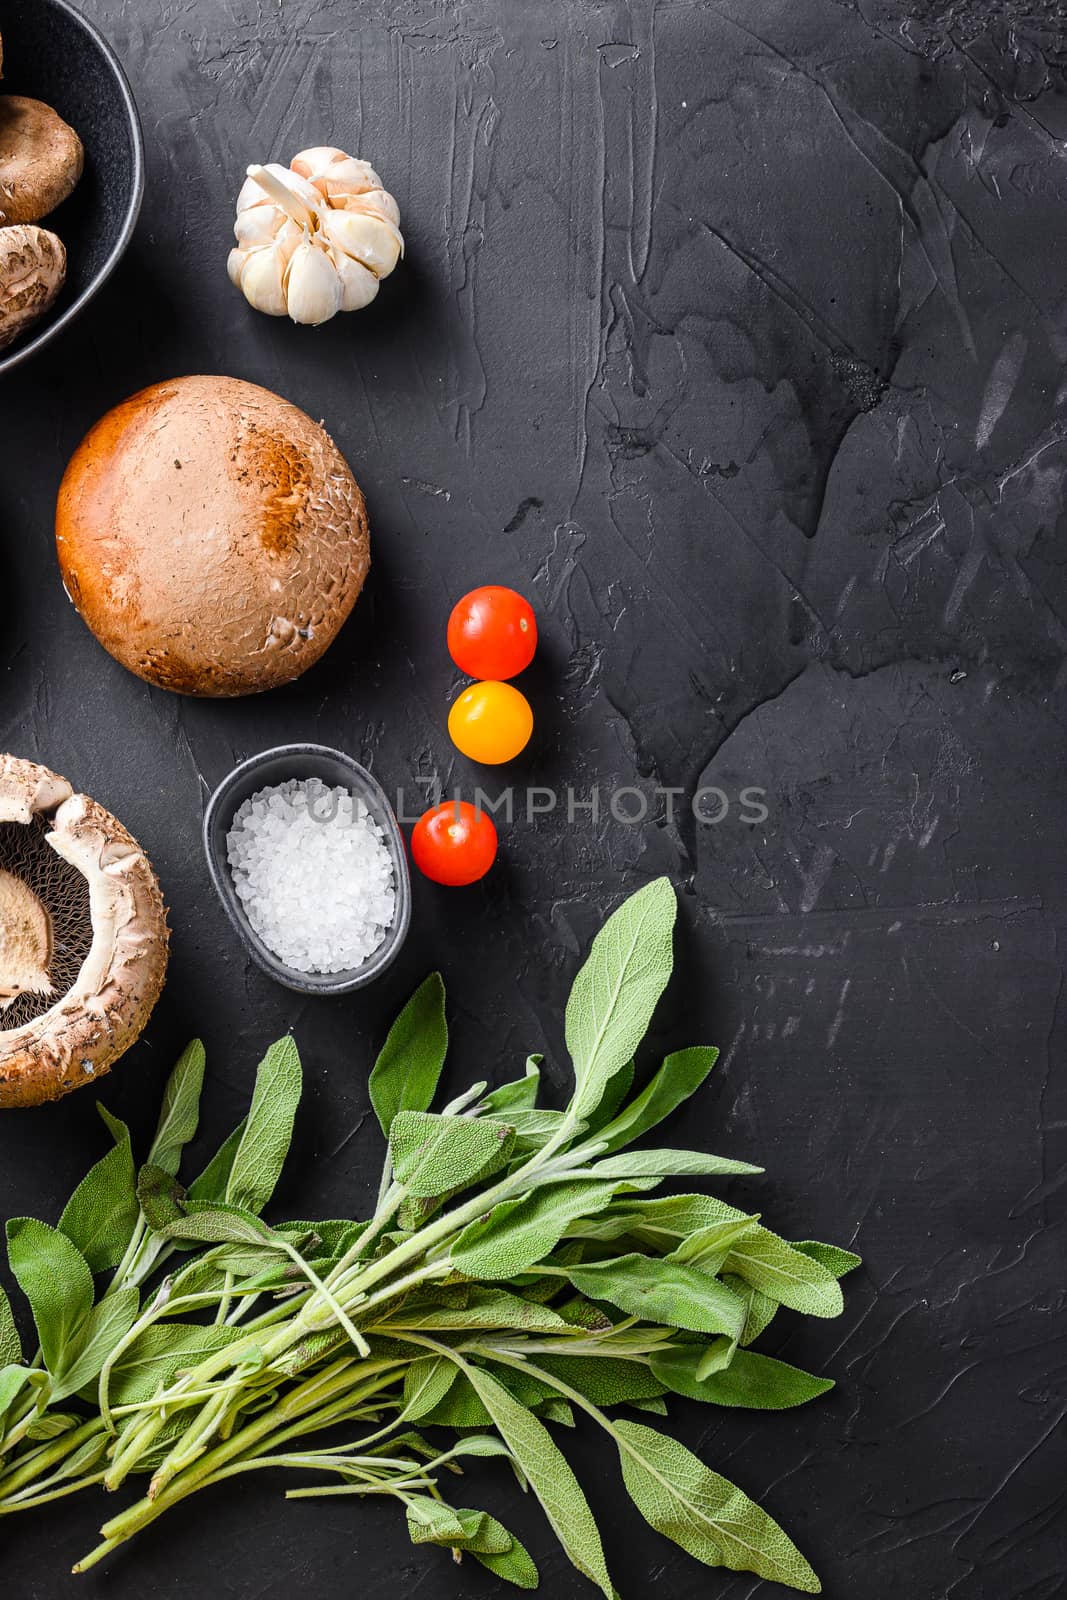 Portabello mushrooms ingredients for baking, cheddar cheese and sage on black background. Top view space for text. by Ilianesolenyi